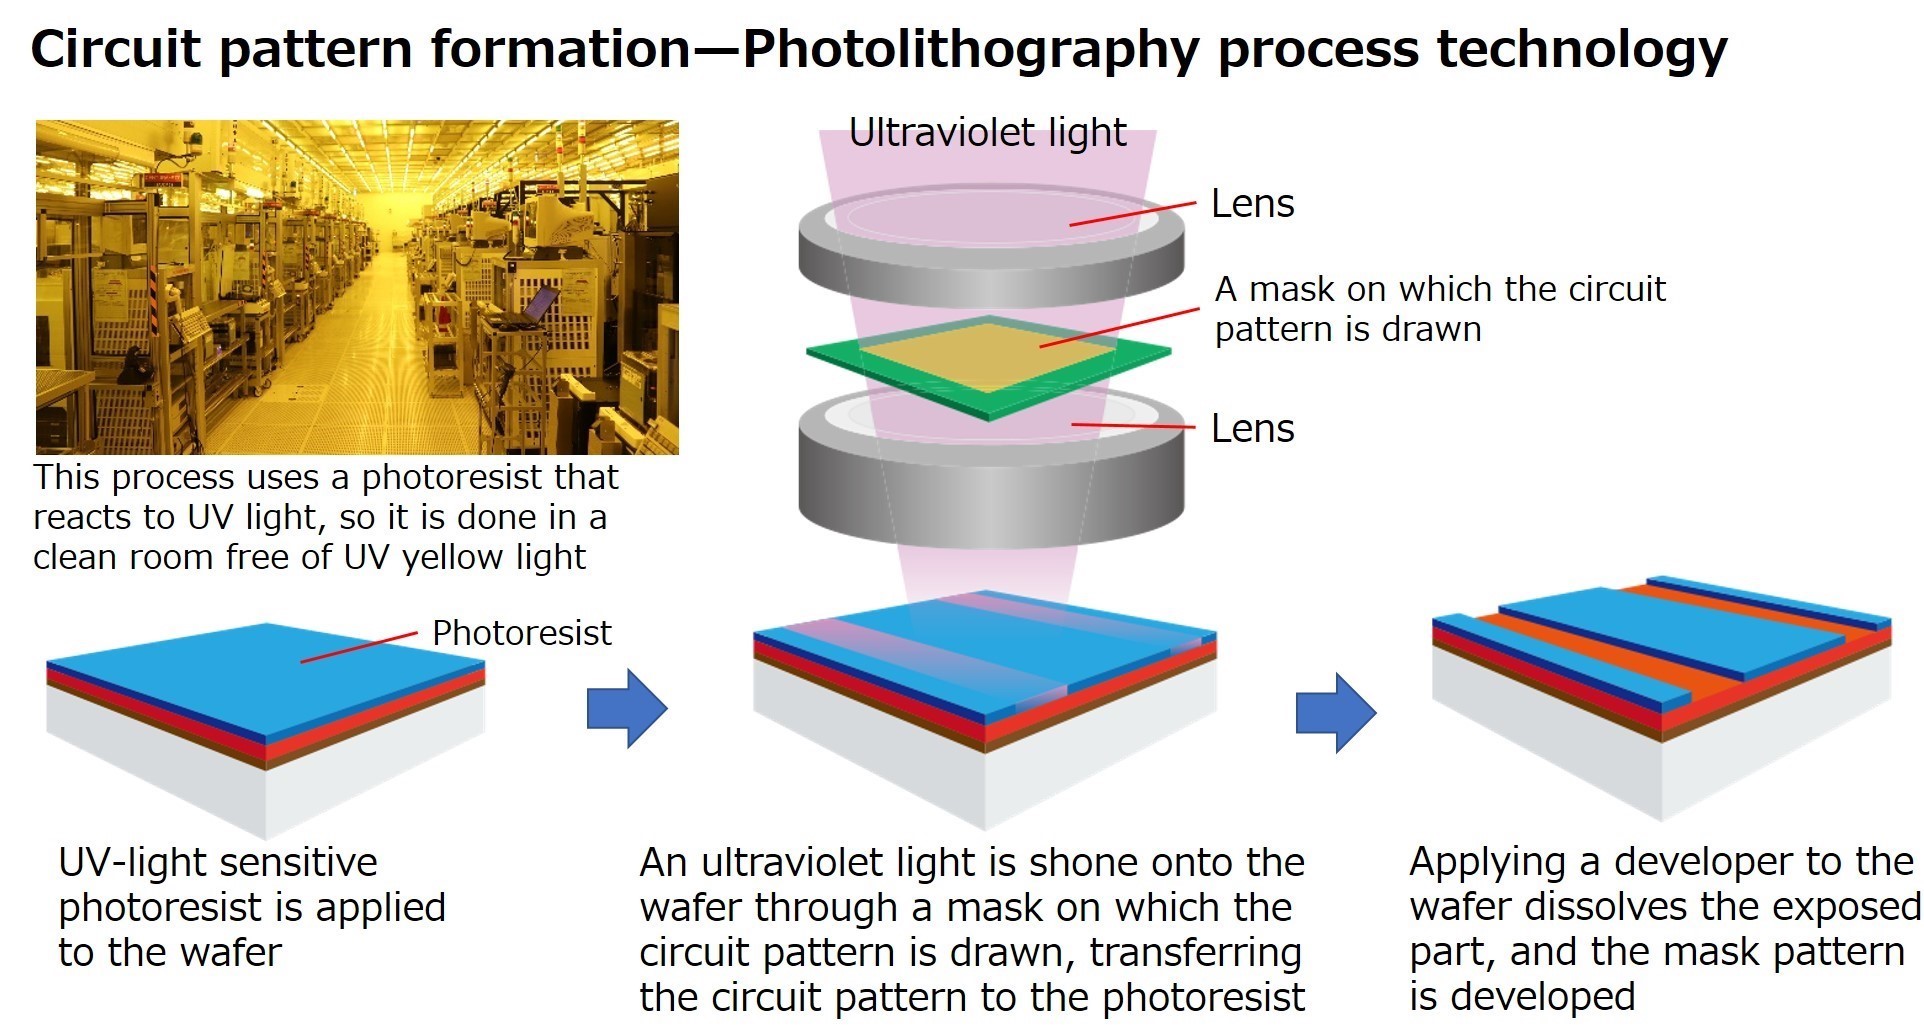 Circuit pattern formation—Photolithography process technology